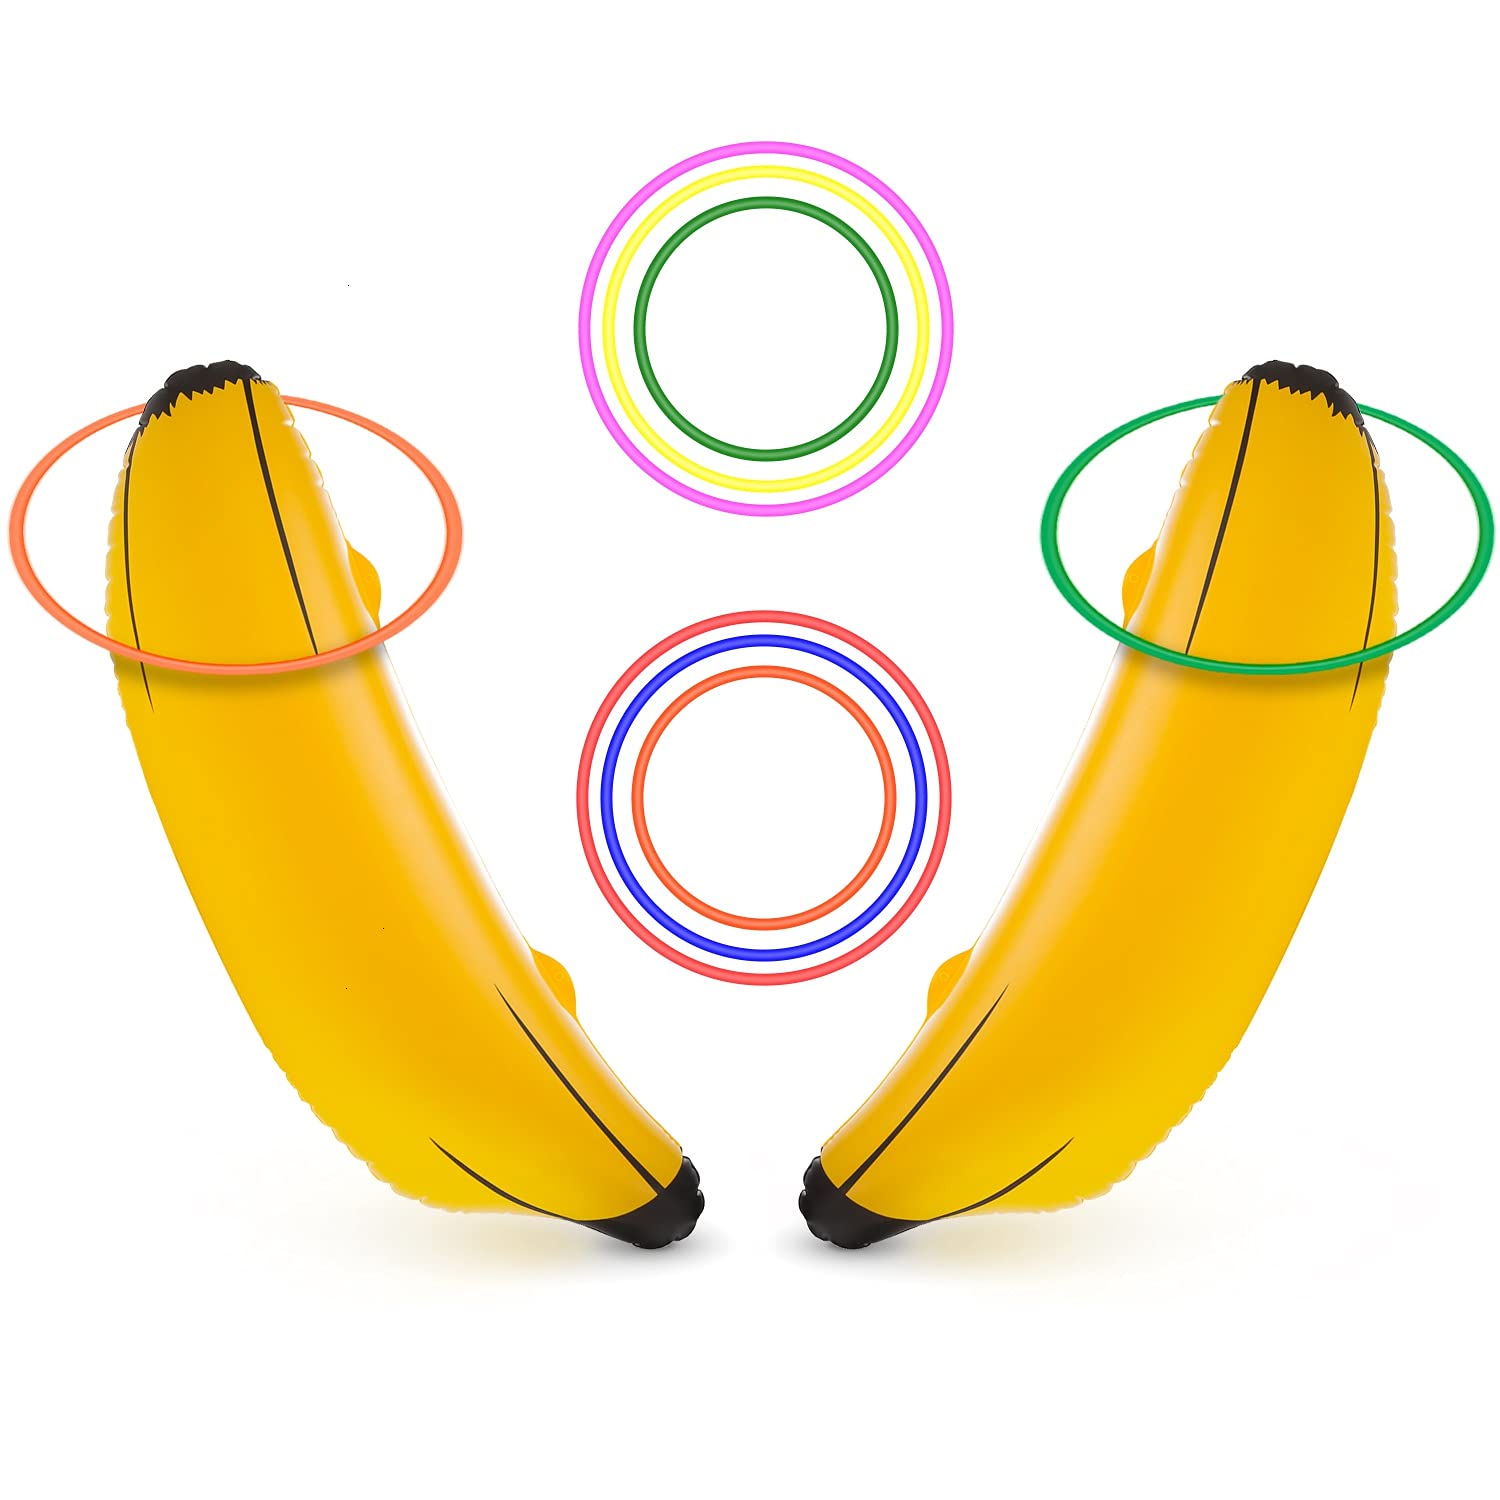 Inflatable Banana Ring Toss Game, Naughty Bachelorette Party Games